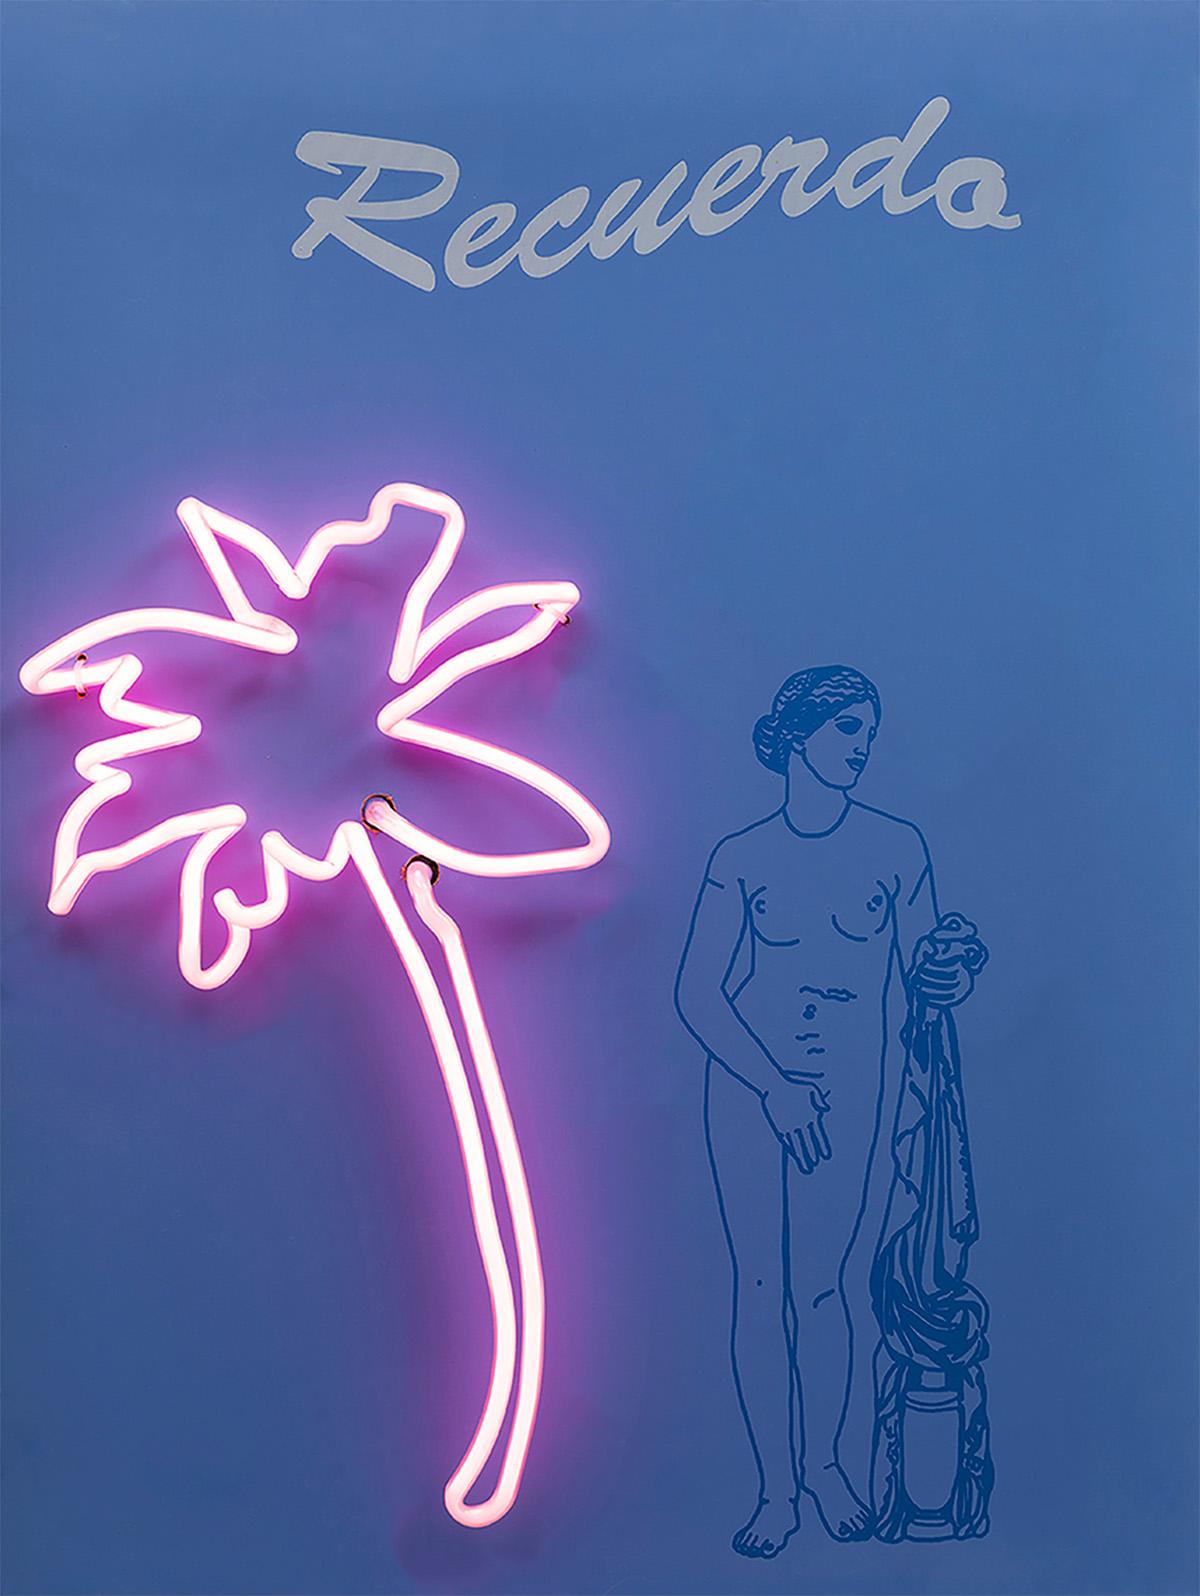 Recuerdo Aphrodite, 2019  Paloma Castello 
From the series Neon Classics
Screen printing with neon lights
Dimensions: 24 H in x 18.1 W x 5.9 D in. 
Edition 6/10

In her work She likes to bring life to objects or icons from the past, intervening in